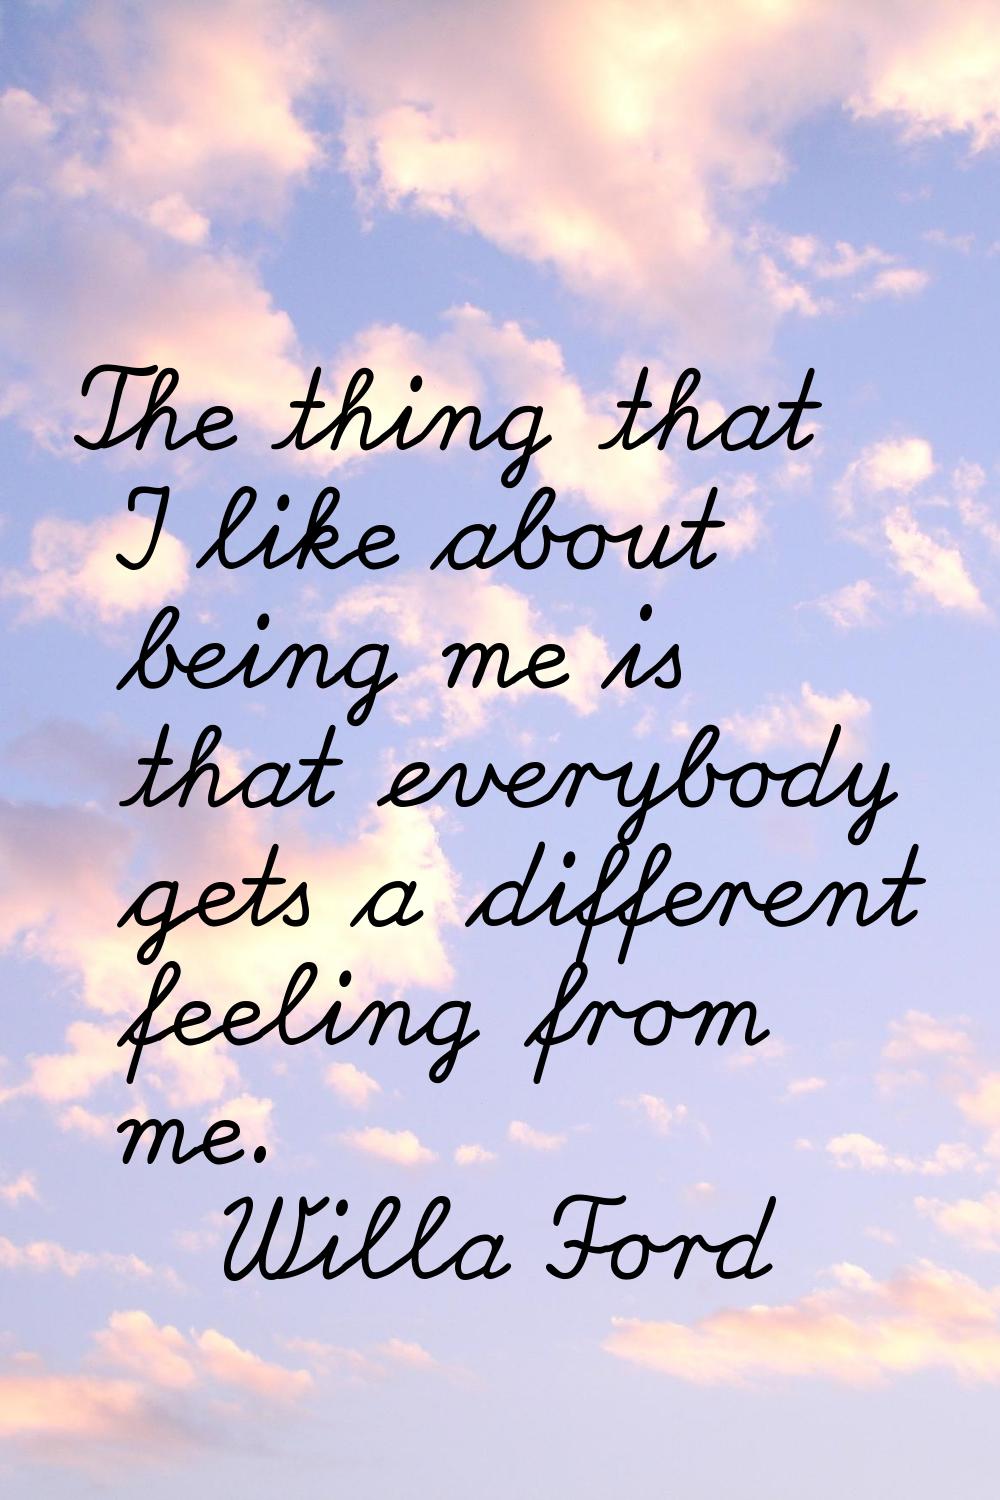 The thing that I like about being me is that everybody gets a different feeling from me.